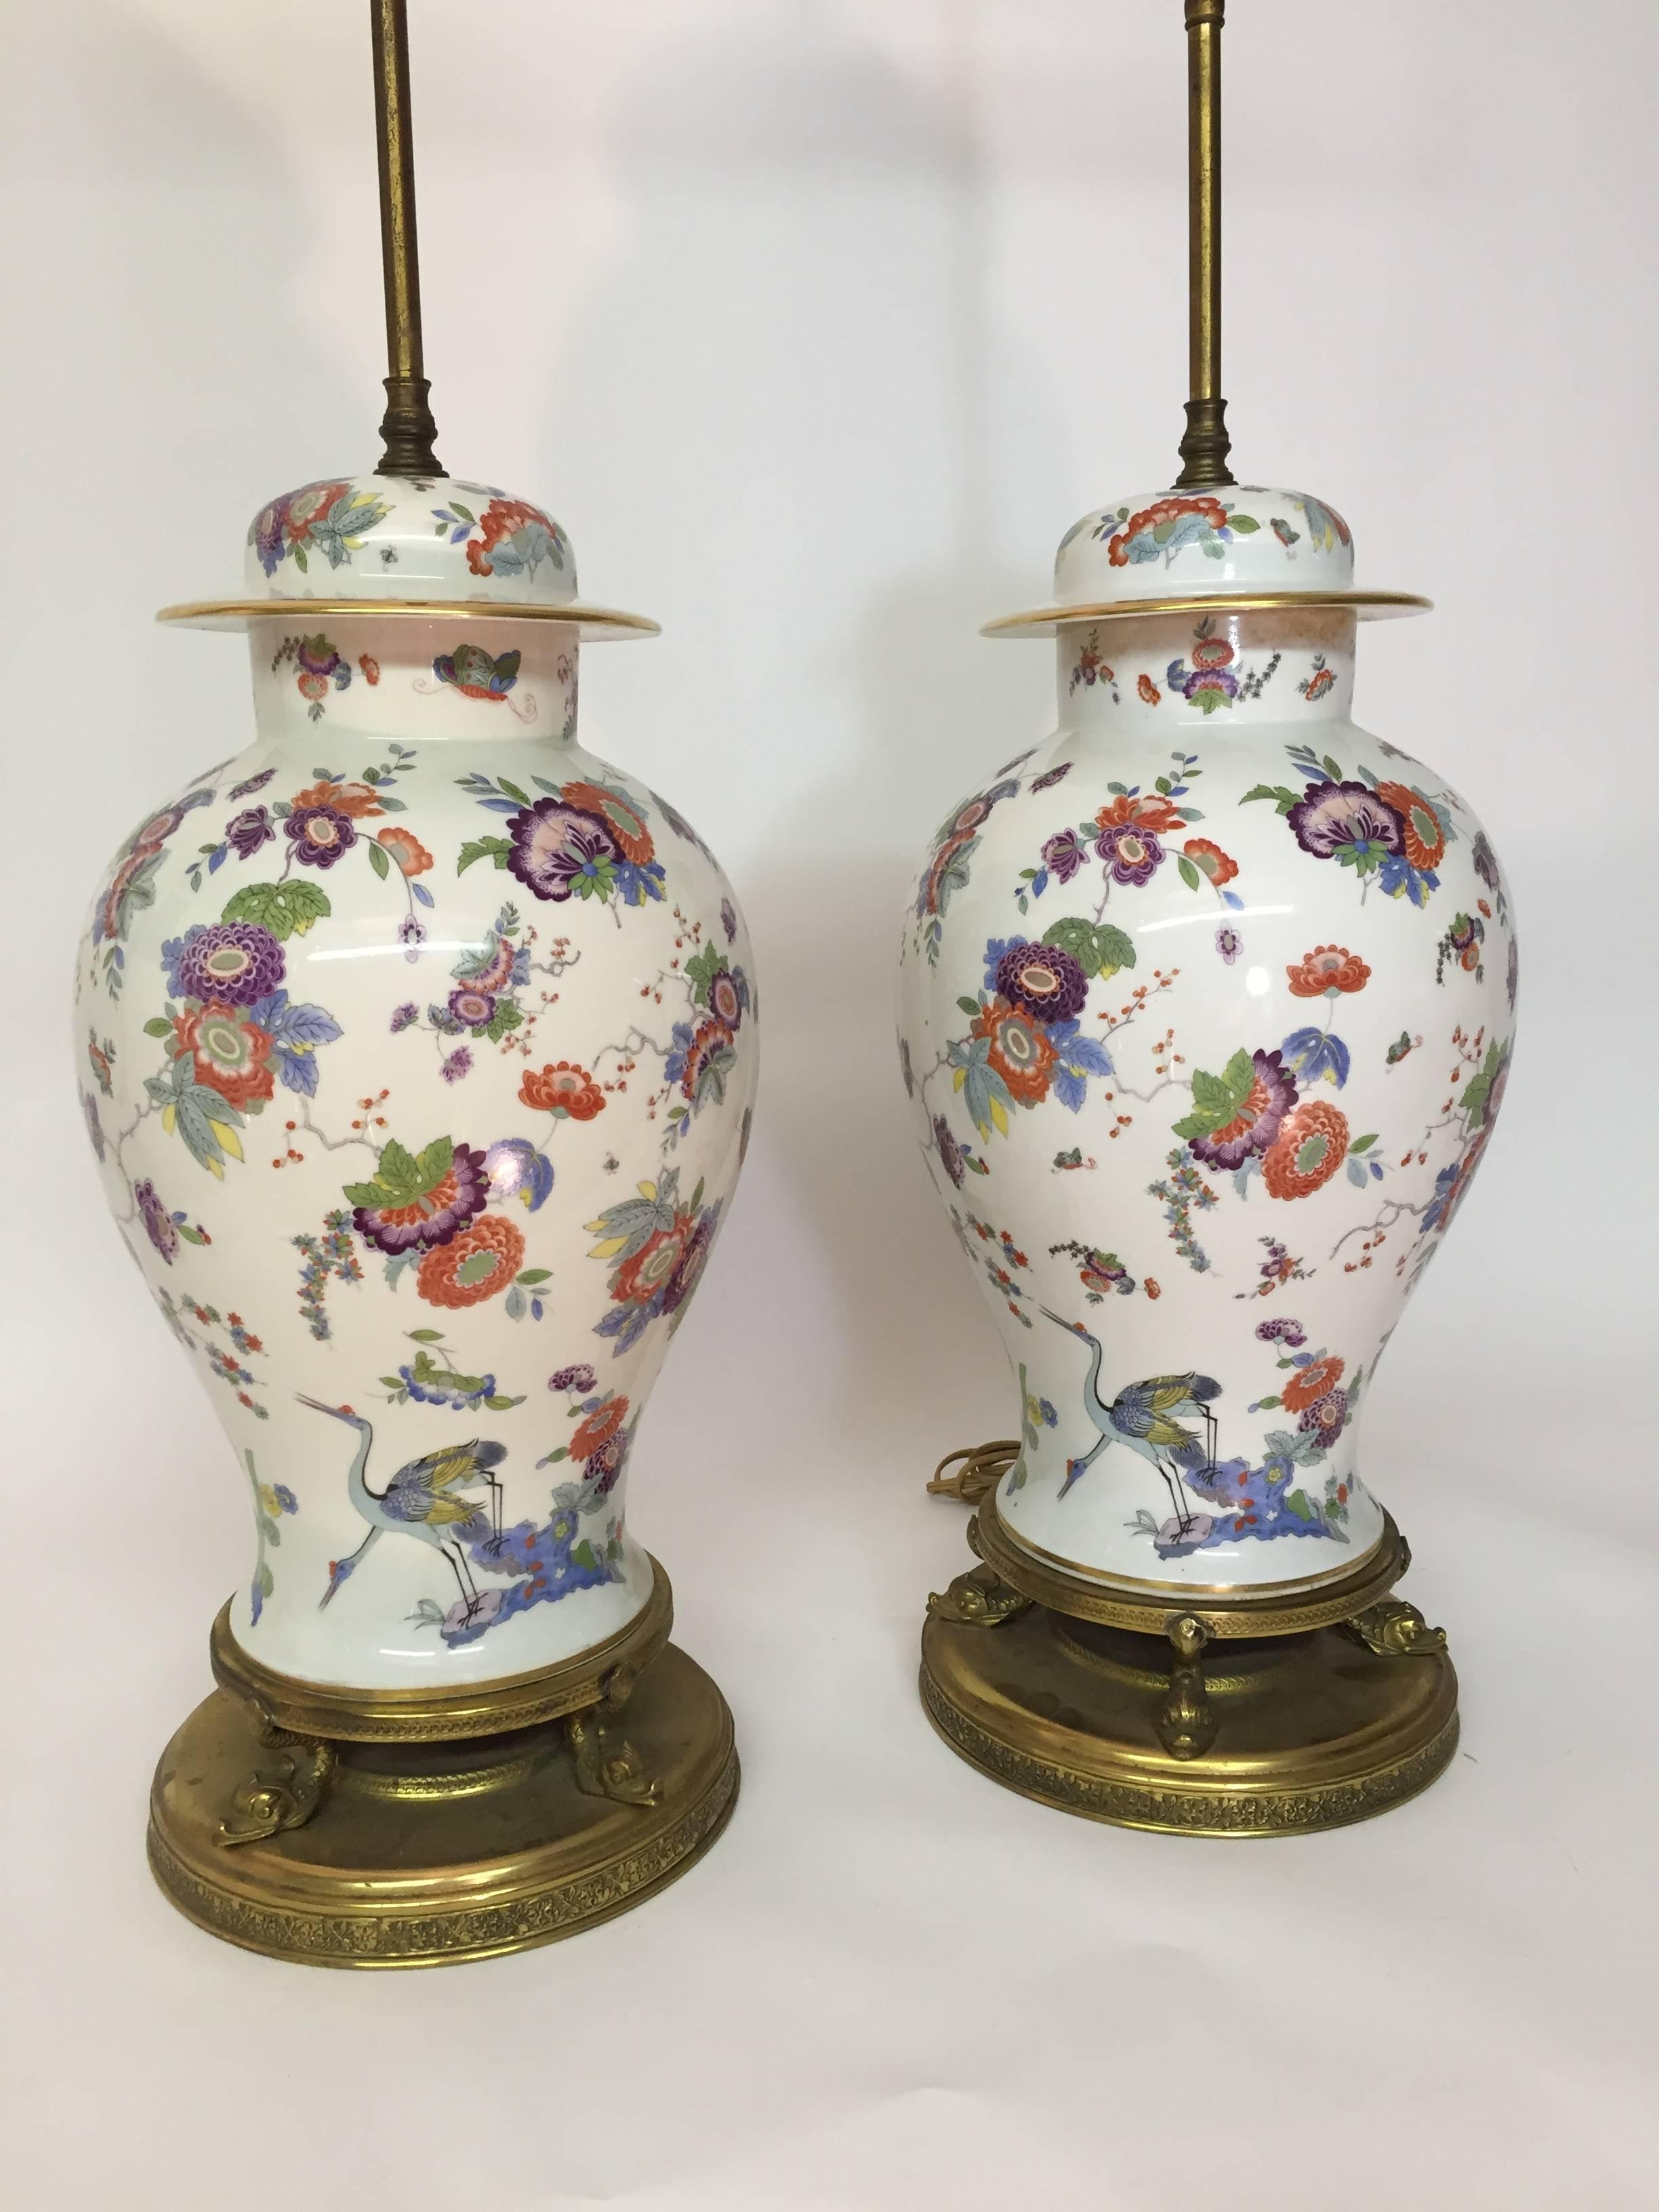 Wonderfully decorated transferware porcelain lamps. Fully signed on the underside, Thomas, Germany, US Zone, 3526, 28, Ardalt, No. 7051, Germany, United States Zone. These are post war and exceptional quality. They were brought back to the U.S. by a